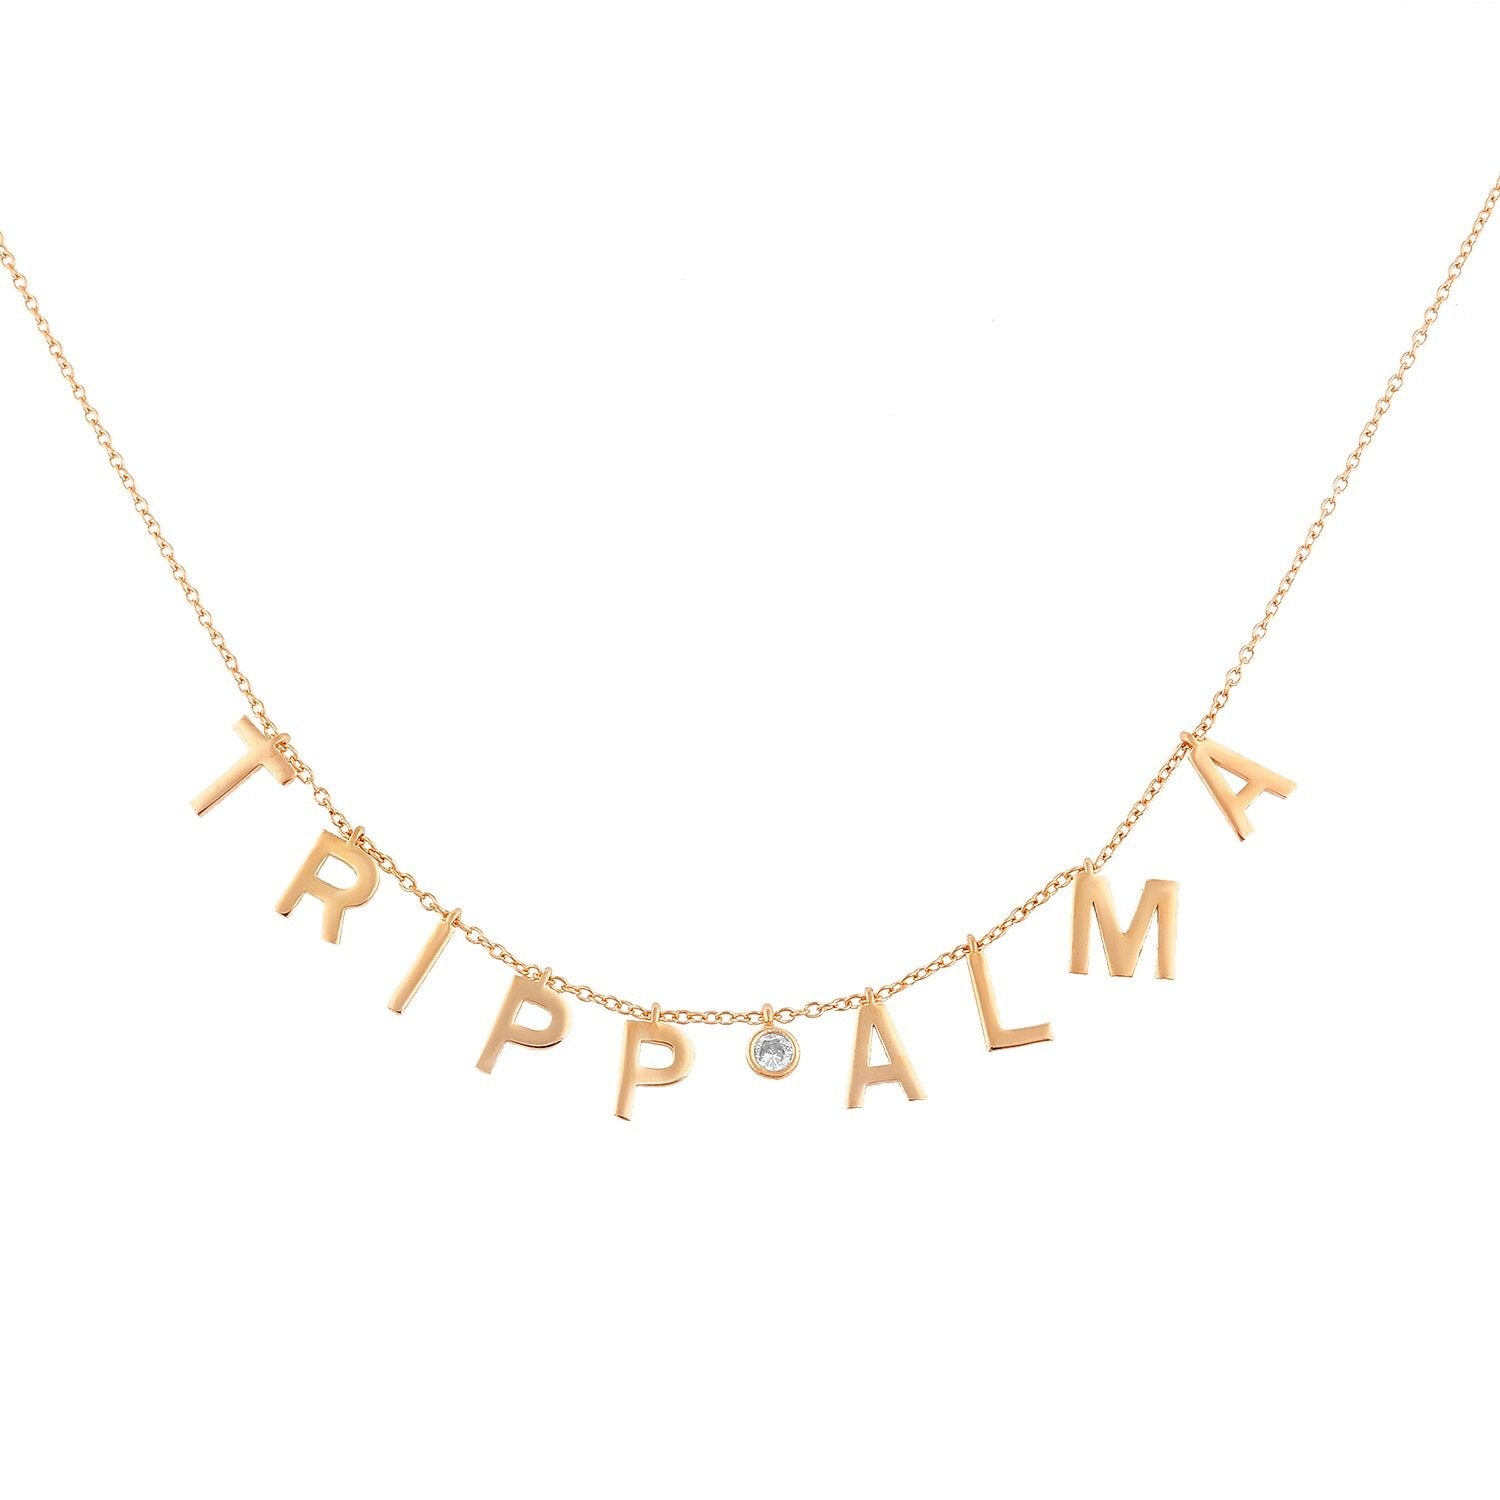 Personalised necklaces: 30 Editor's picks to shop now